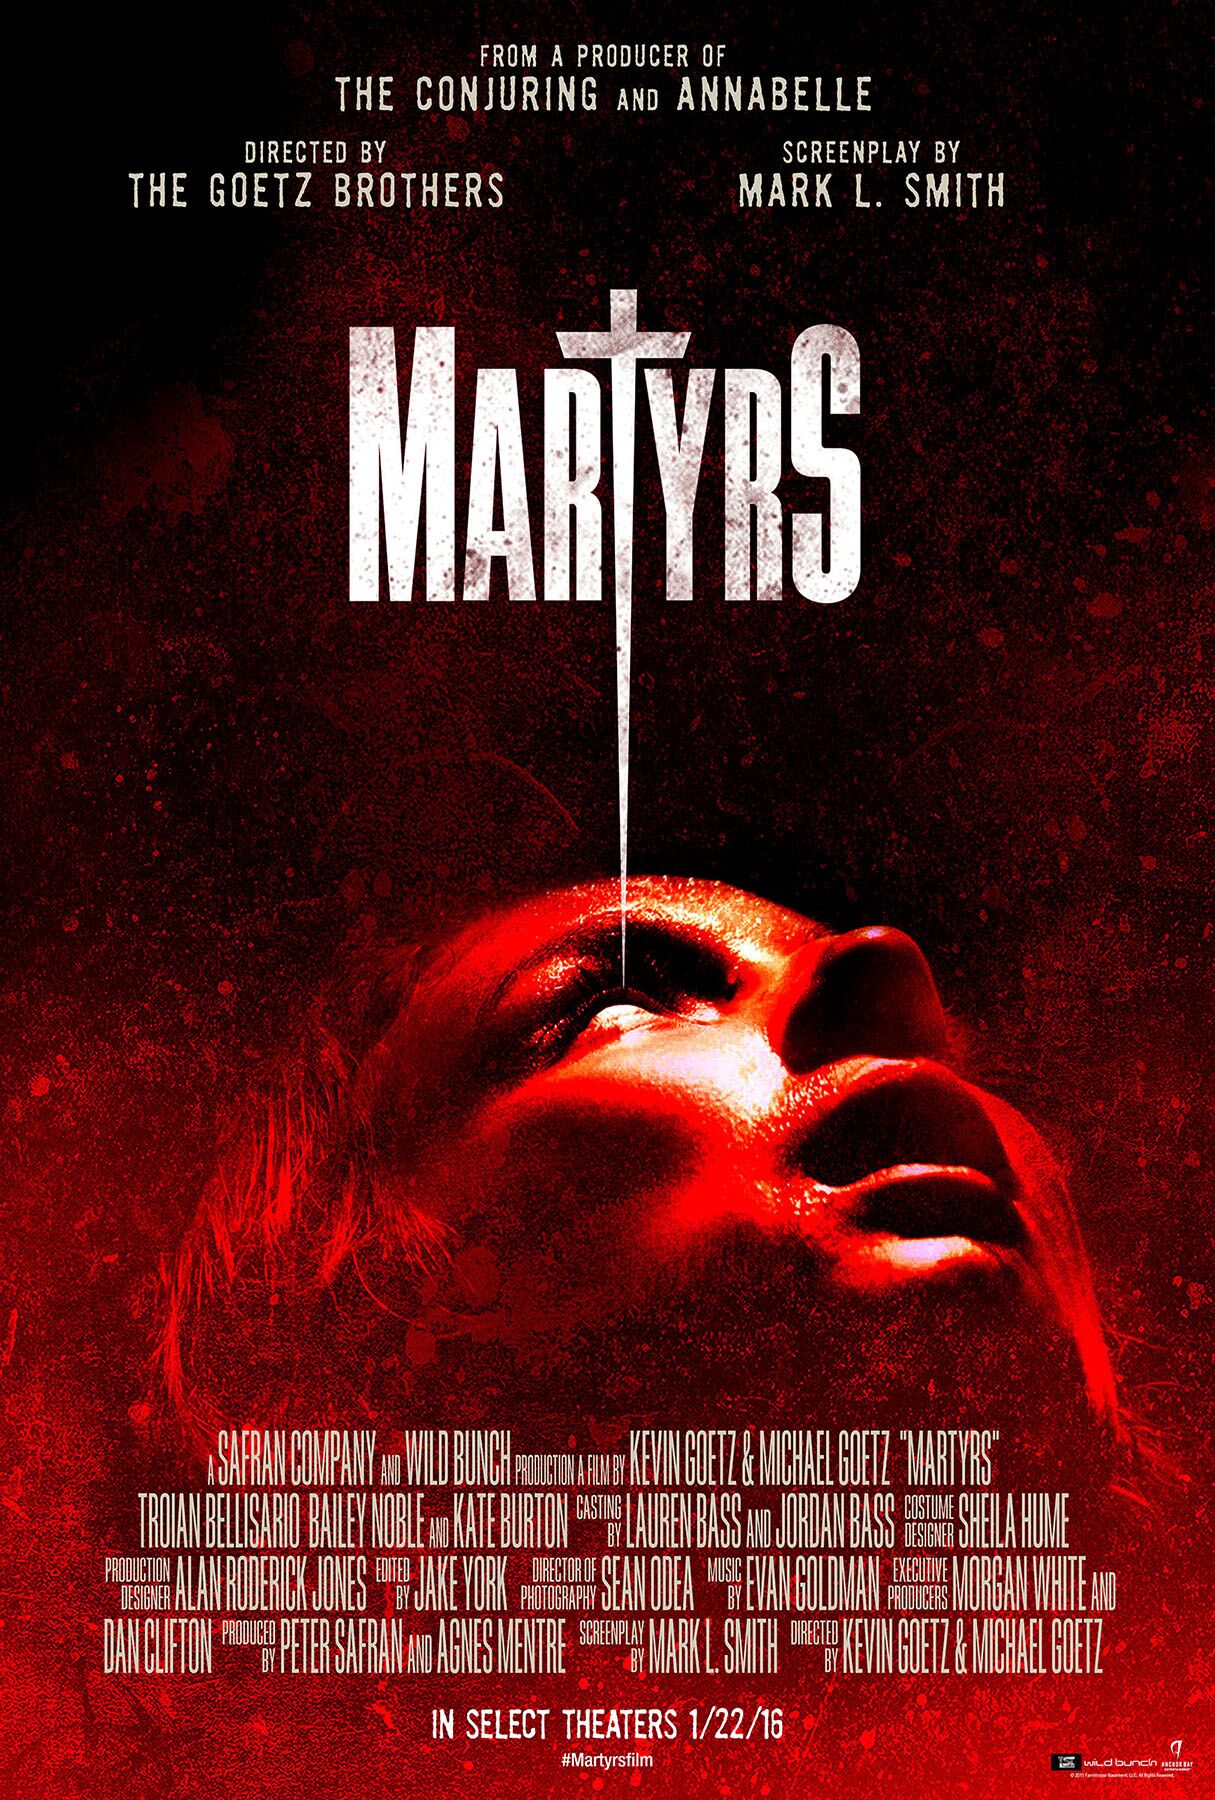 Martyrs1